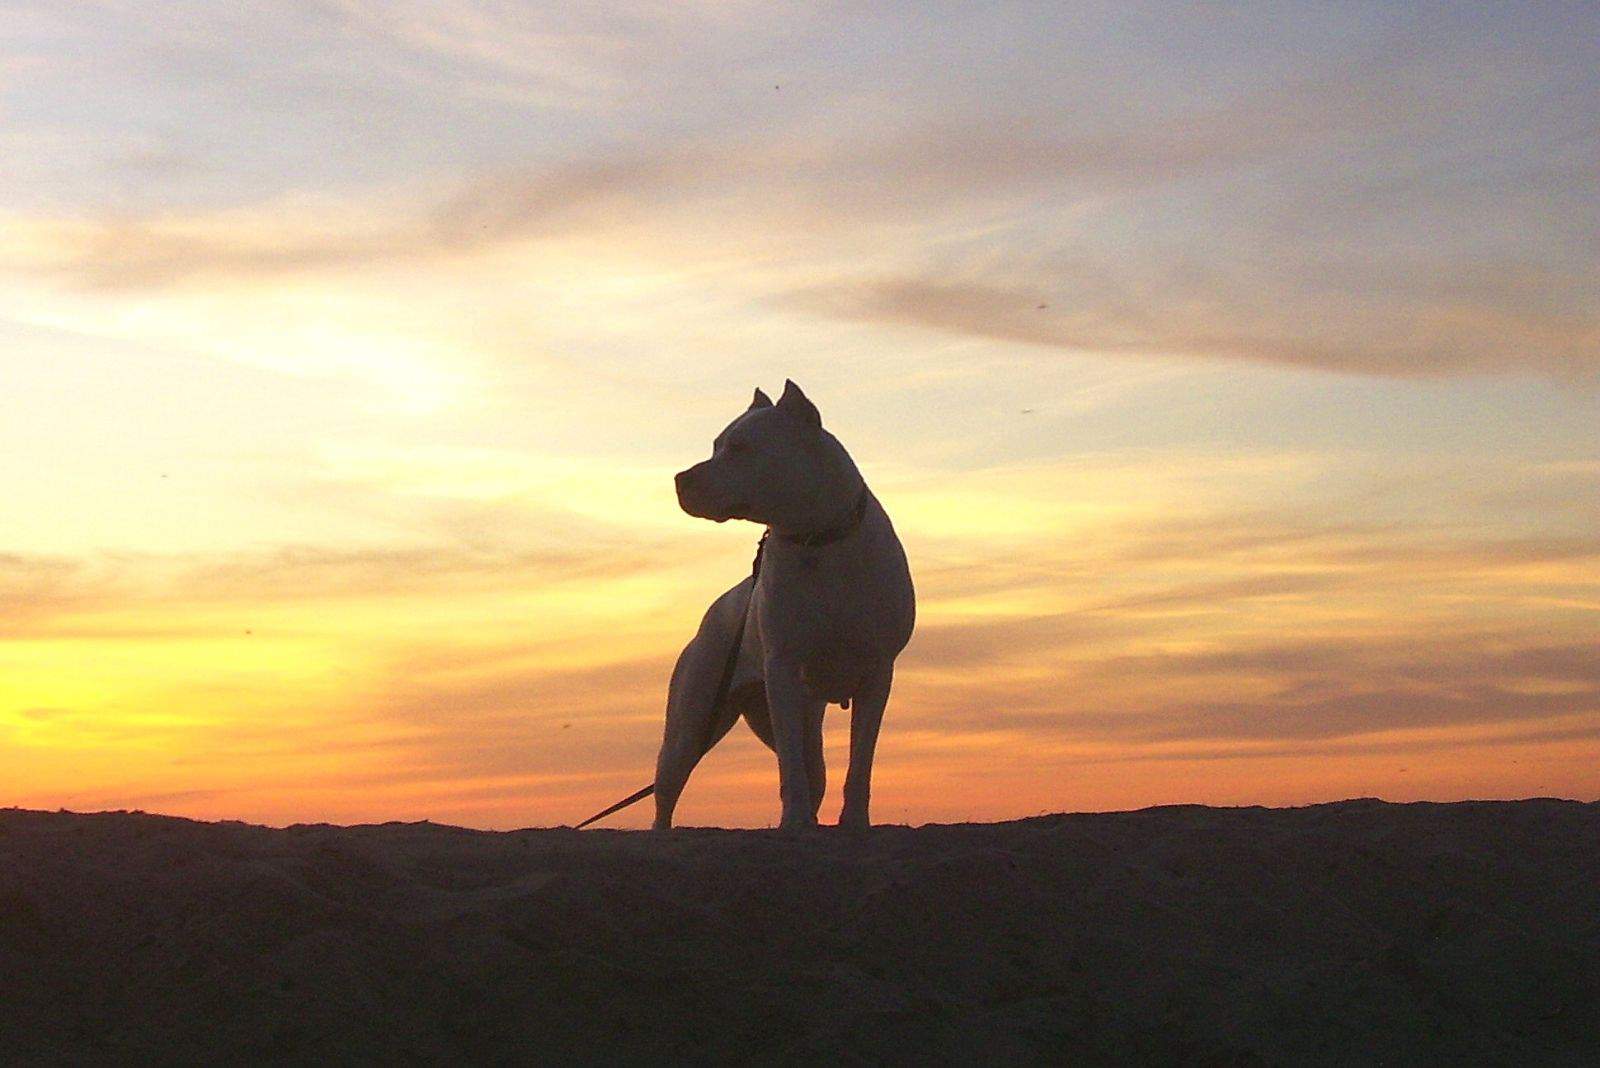 What Is A Dogo Argentino And How To Take Good Care Of It?